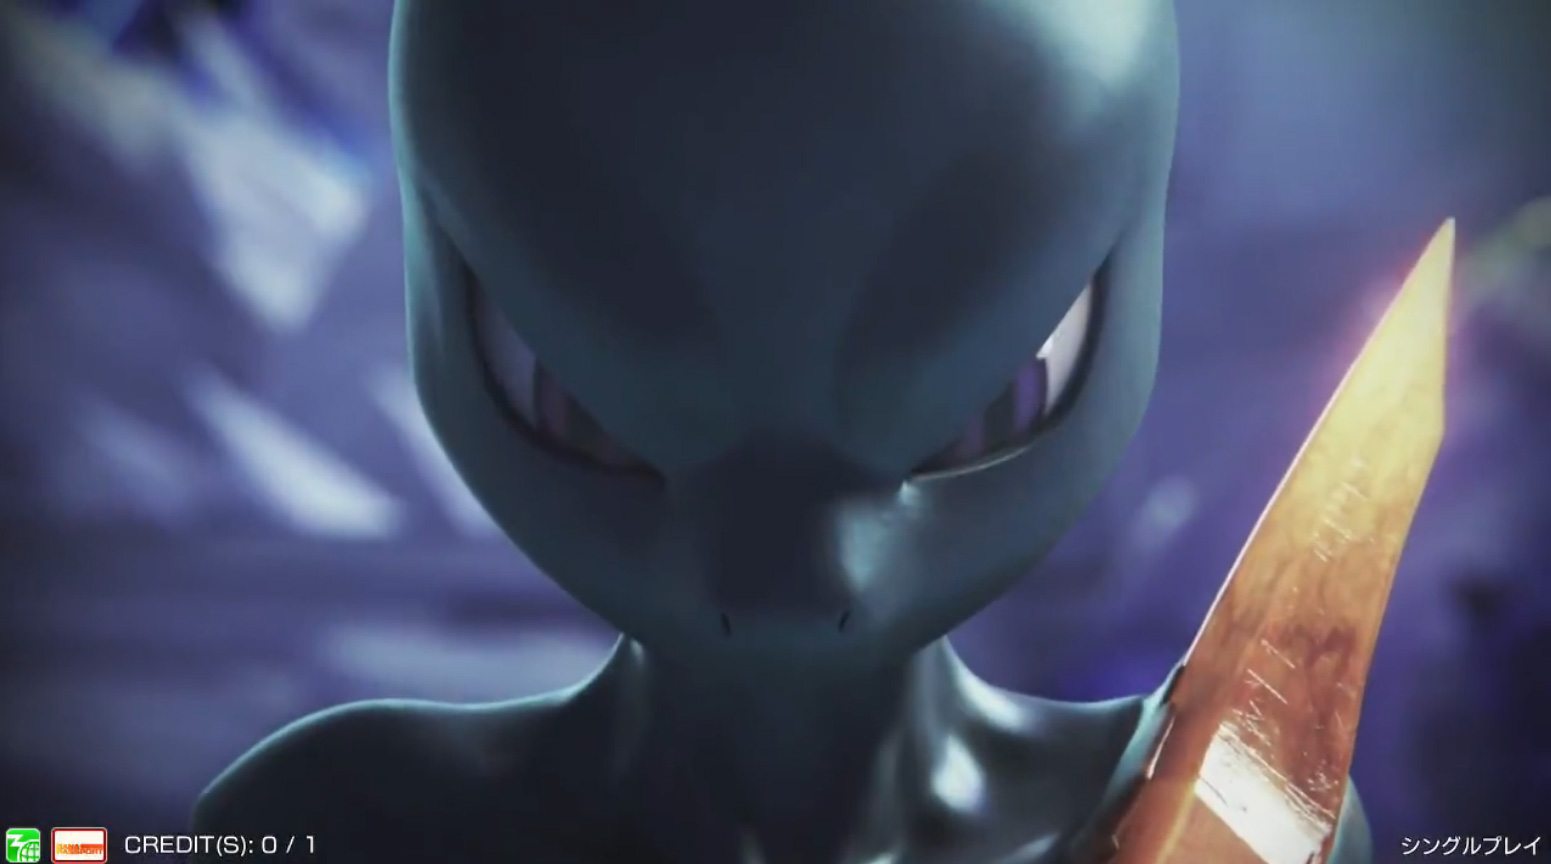 Mewtwo, Braixen, and Garchomp Confirmed for “Pokken Tournament” - Plus Another Reveal Coming Soon